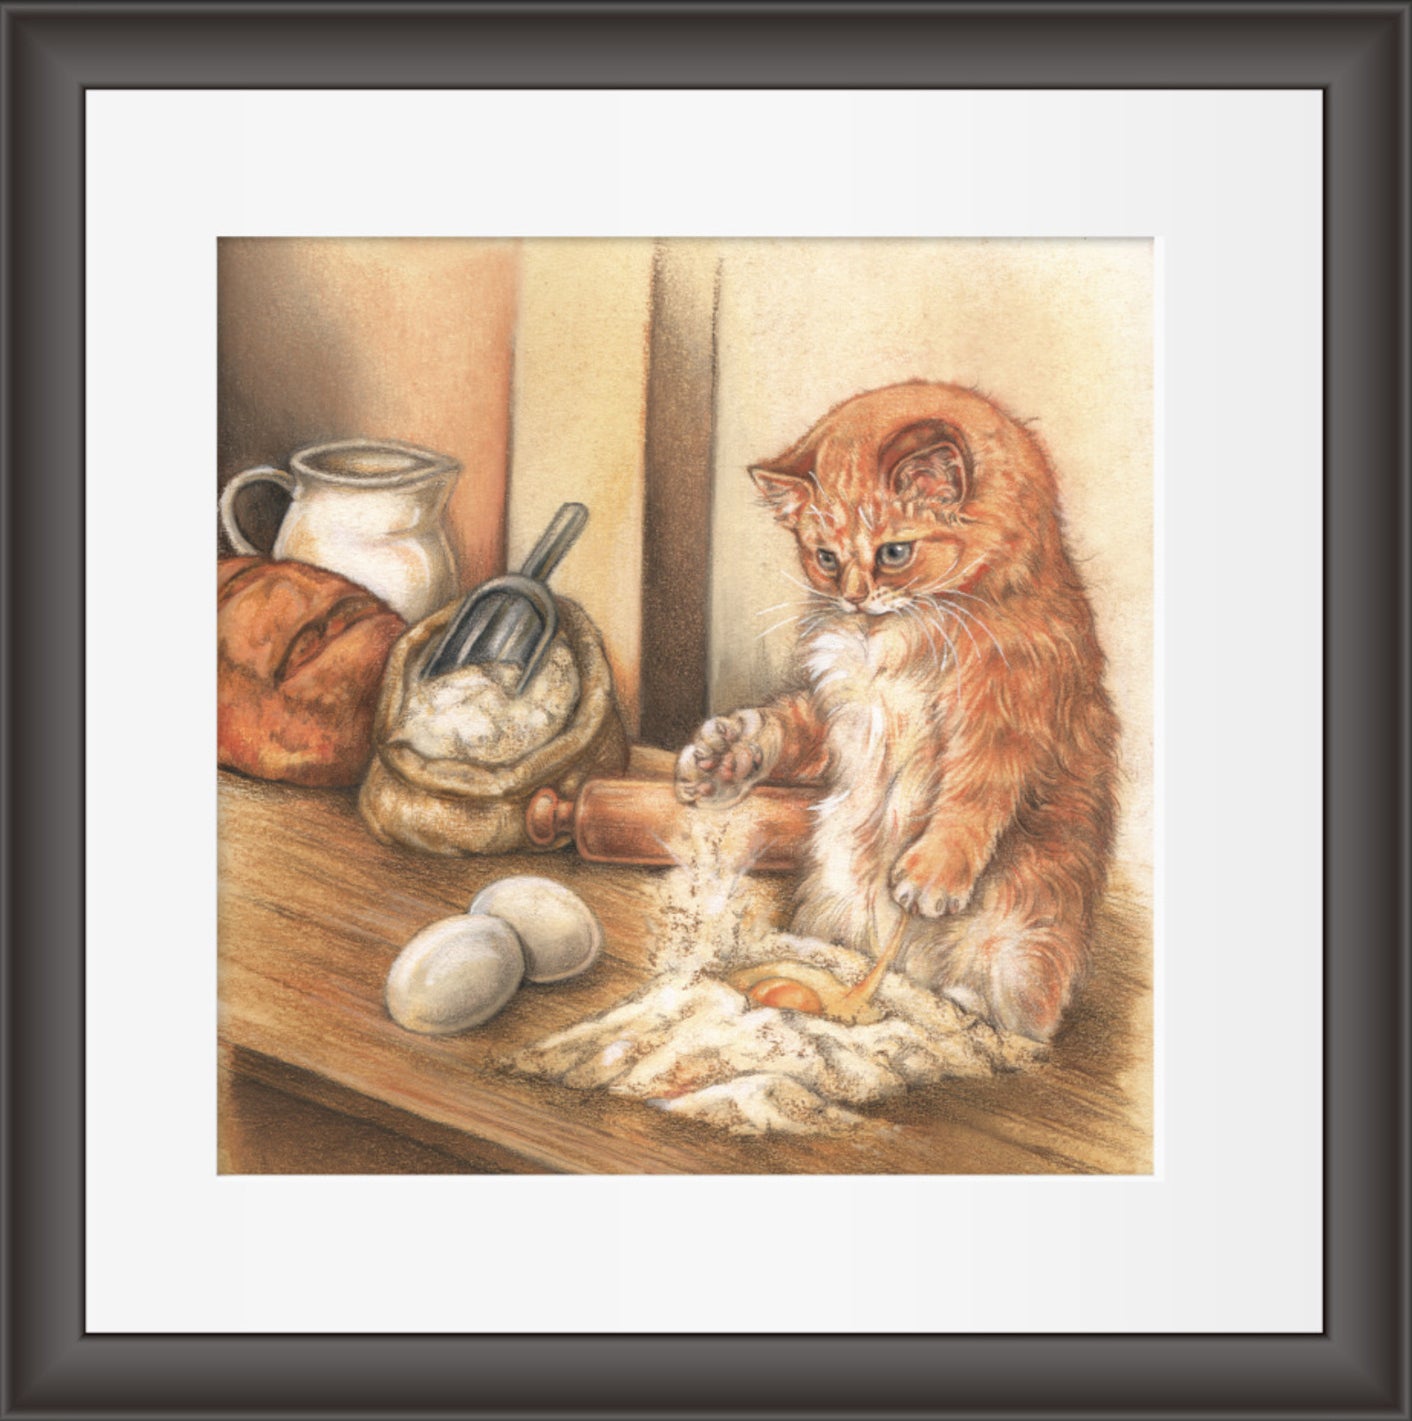 Reproduction "Cat in the Kitchen".